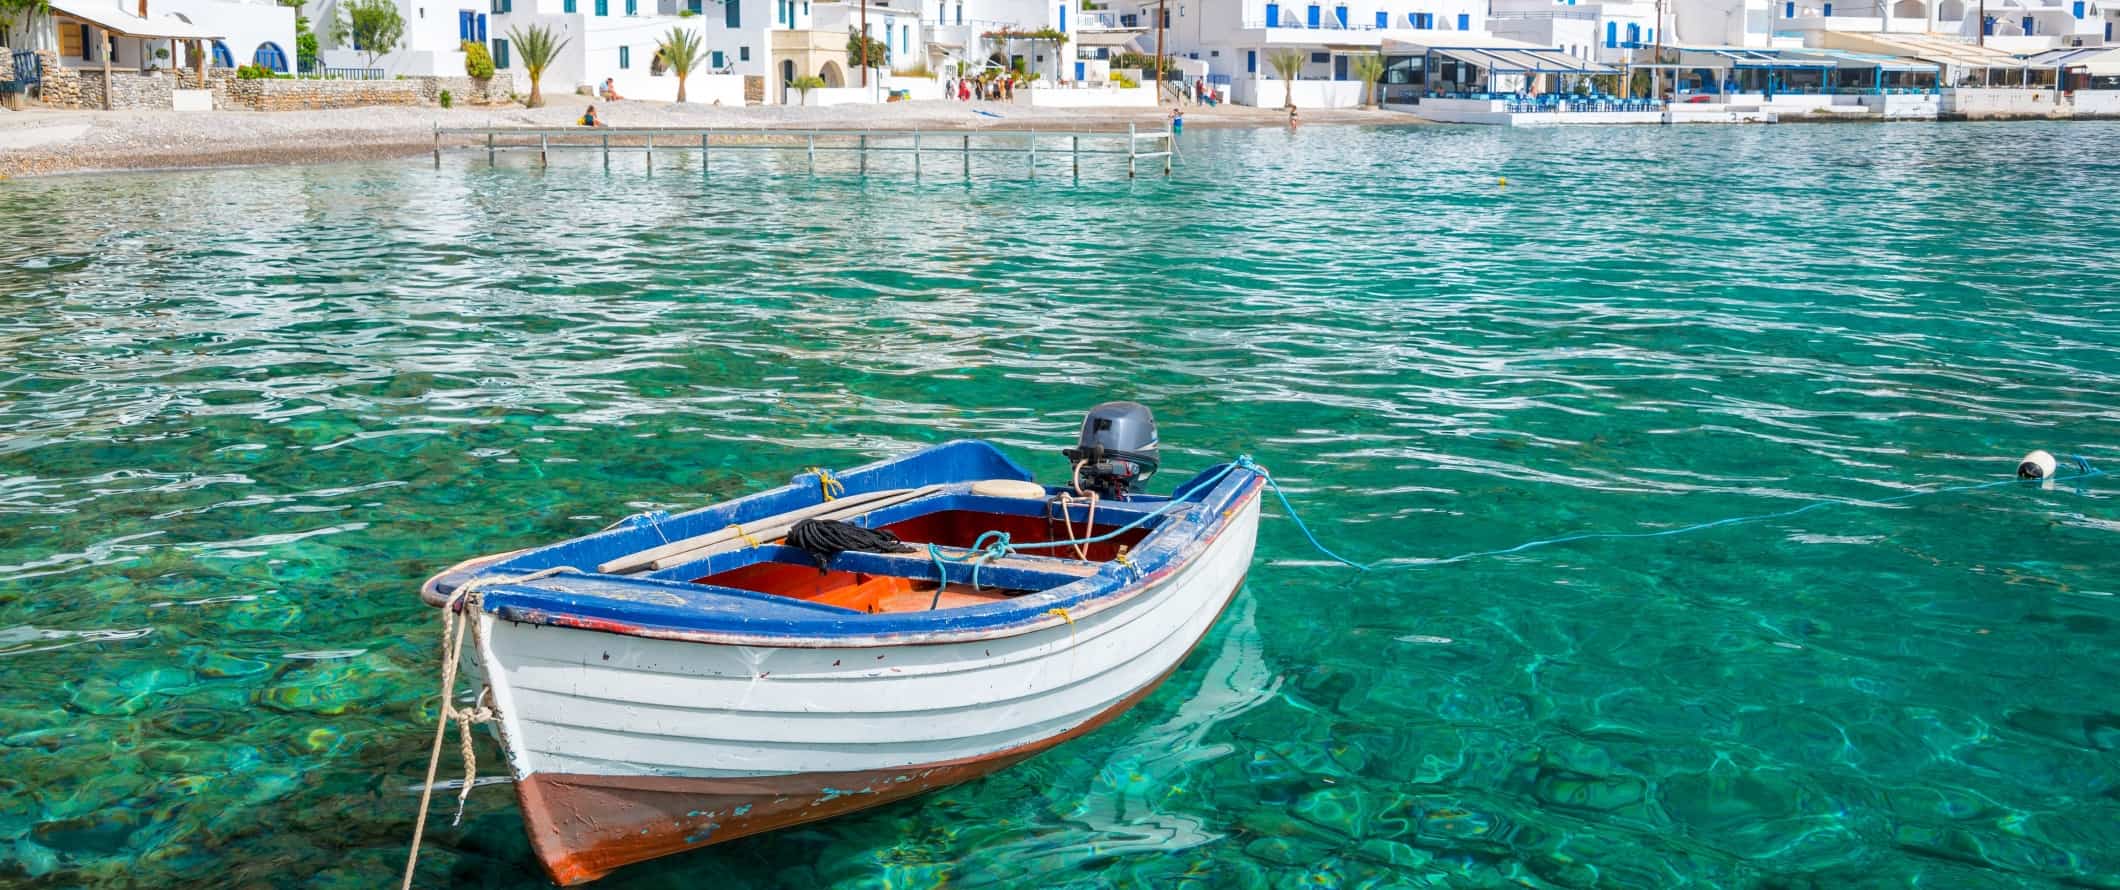 Lone boat in the clear turquoise waters of a bay lined with white houses on the island of Crete in Greece.